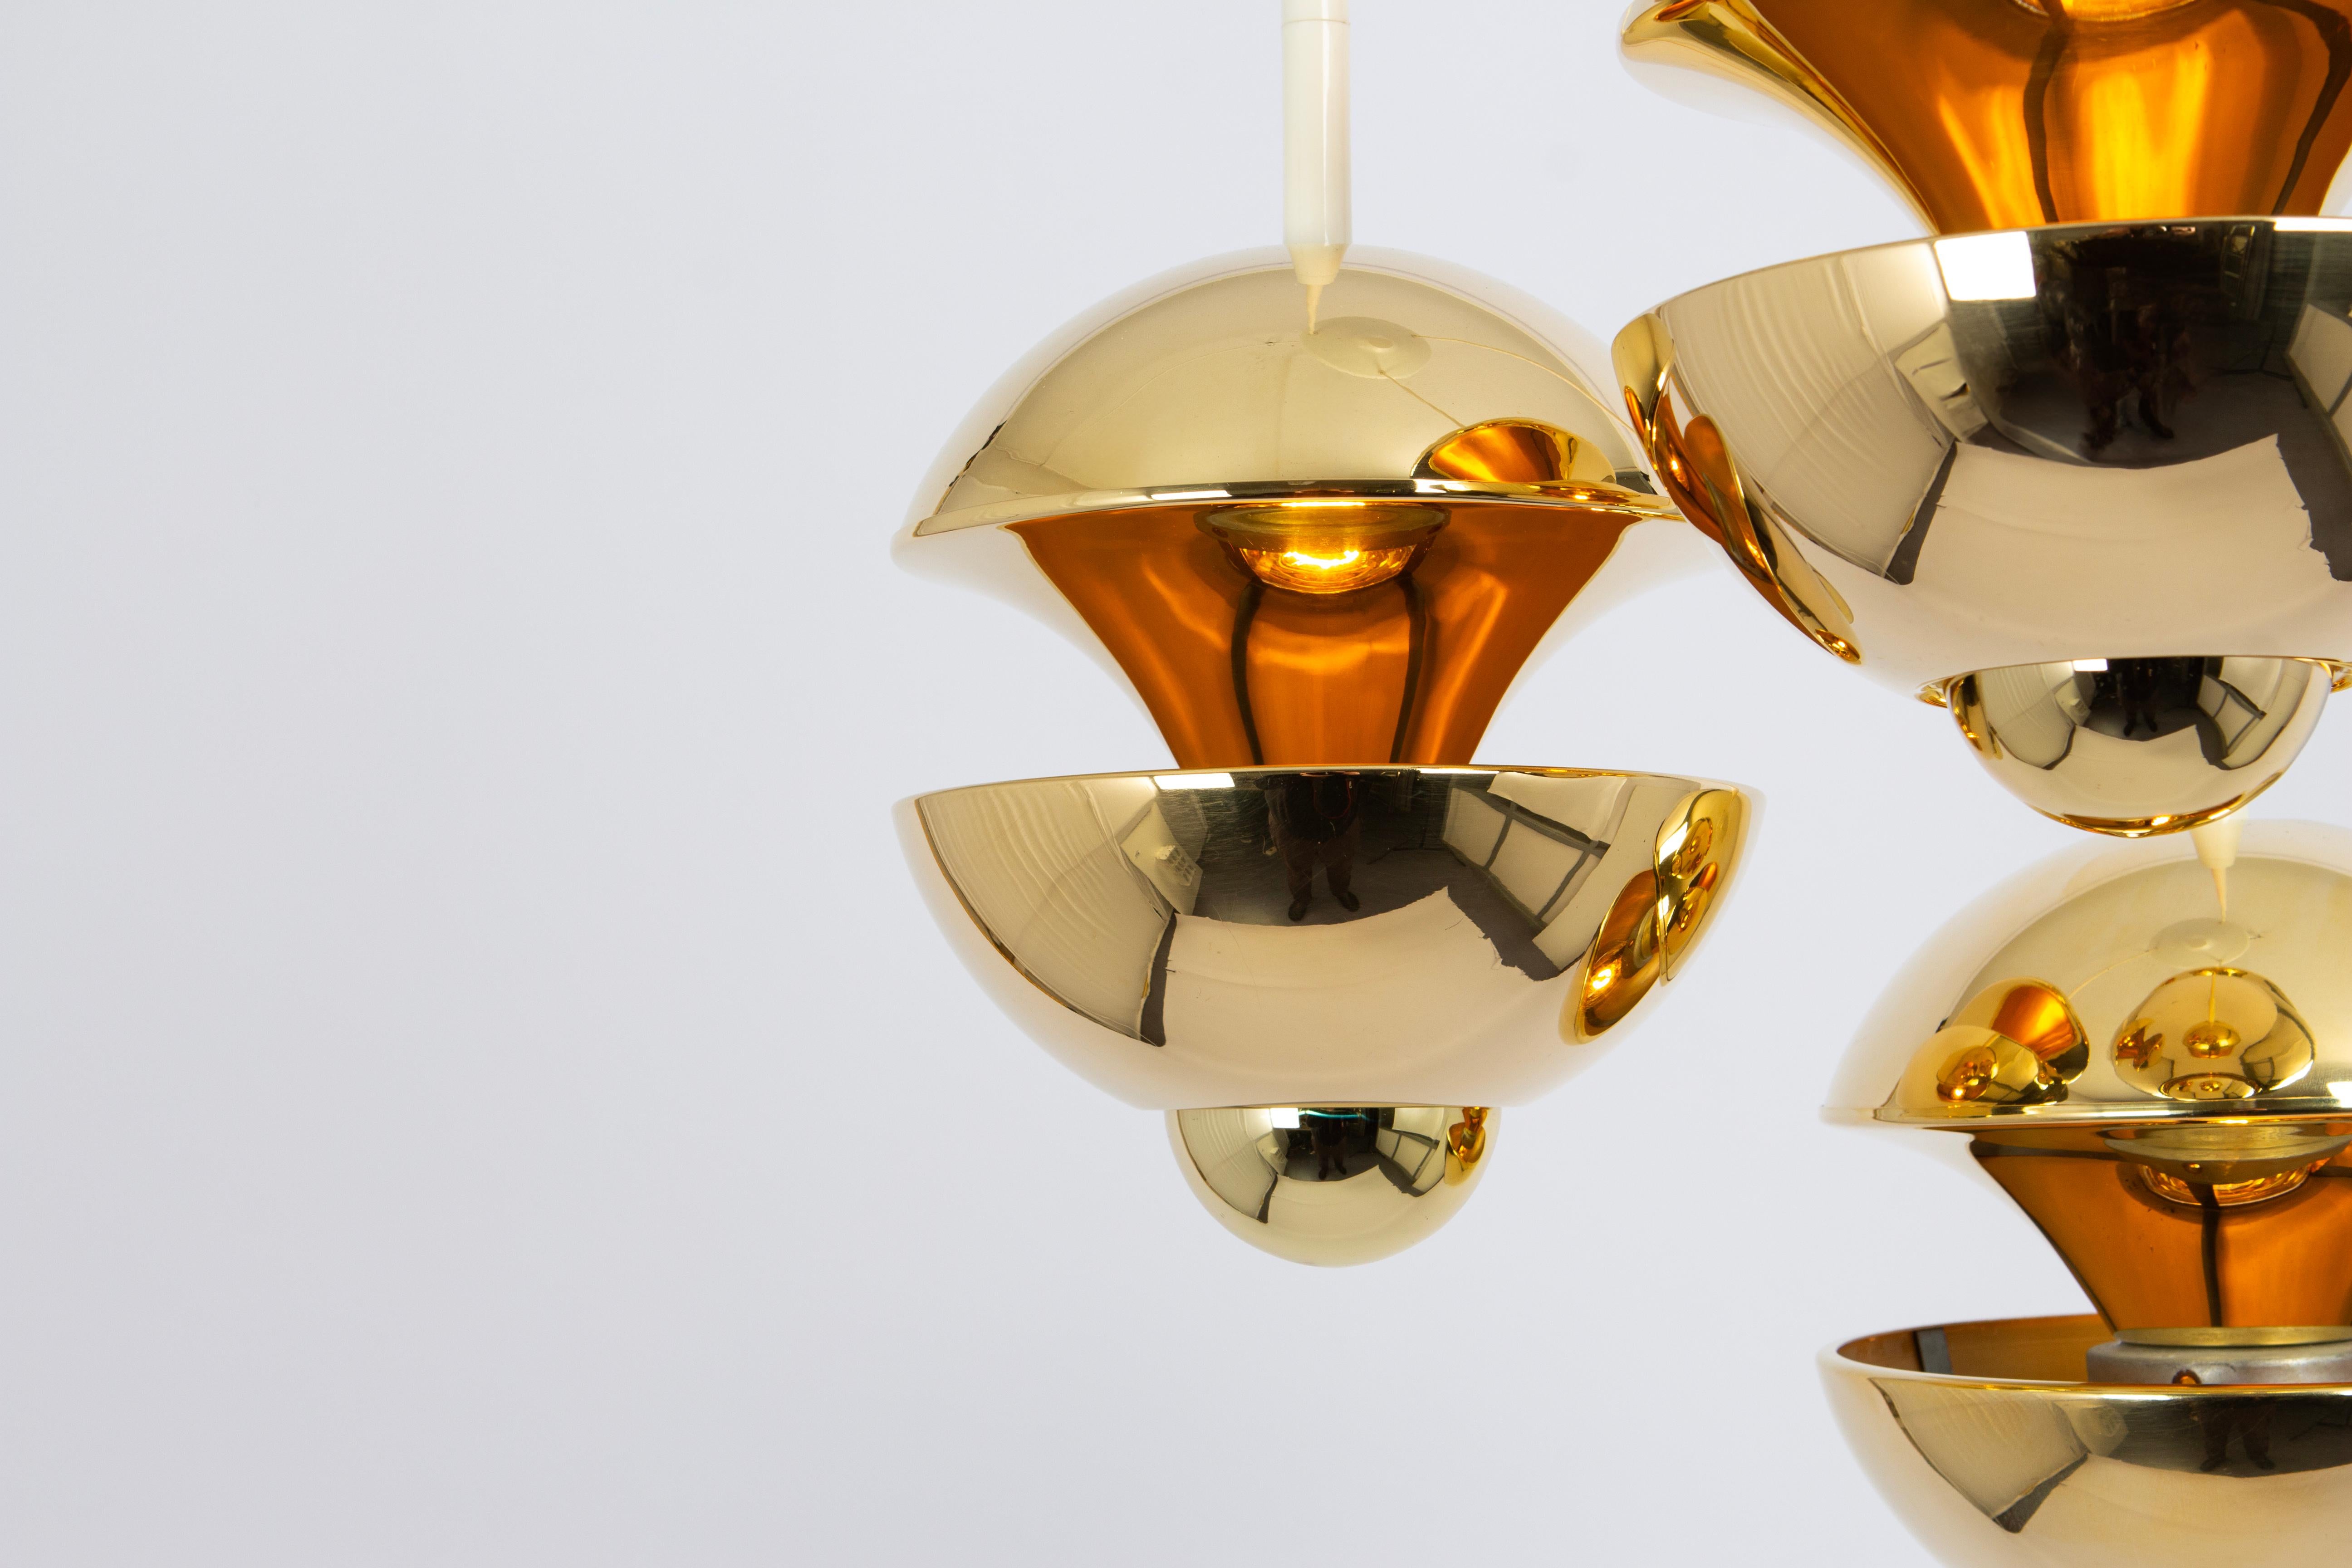 A special cascading Brass Pendant made by Kaiser Leuchten, Germany, 1970s
Designer: Klaus Hempel
Wonderful form and stunning light effect.
This Model won the IF Product Design Award 1972
Sockets: 3 x E14 small bulbs. (40 W max each).
Light bulbs are